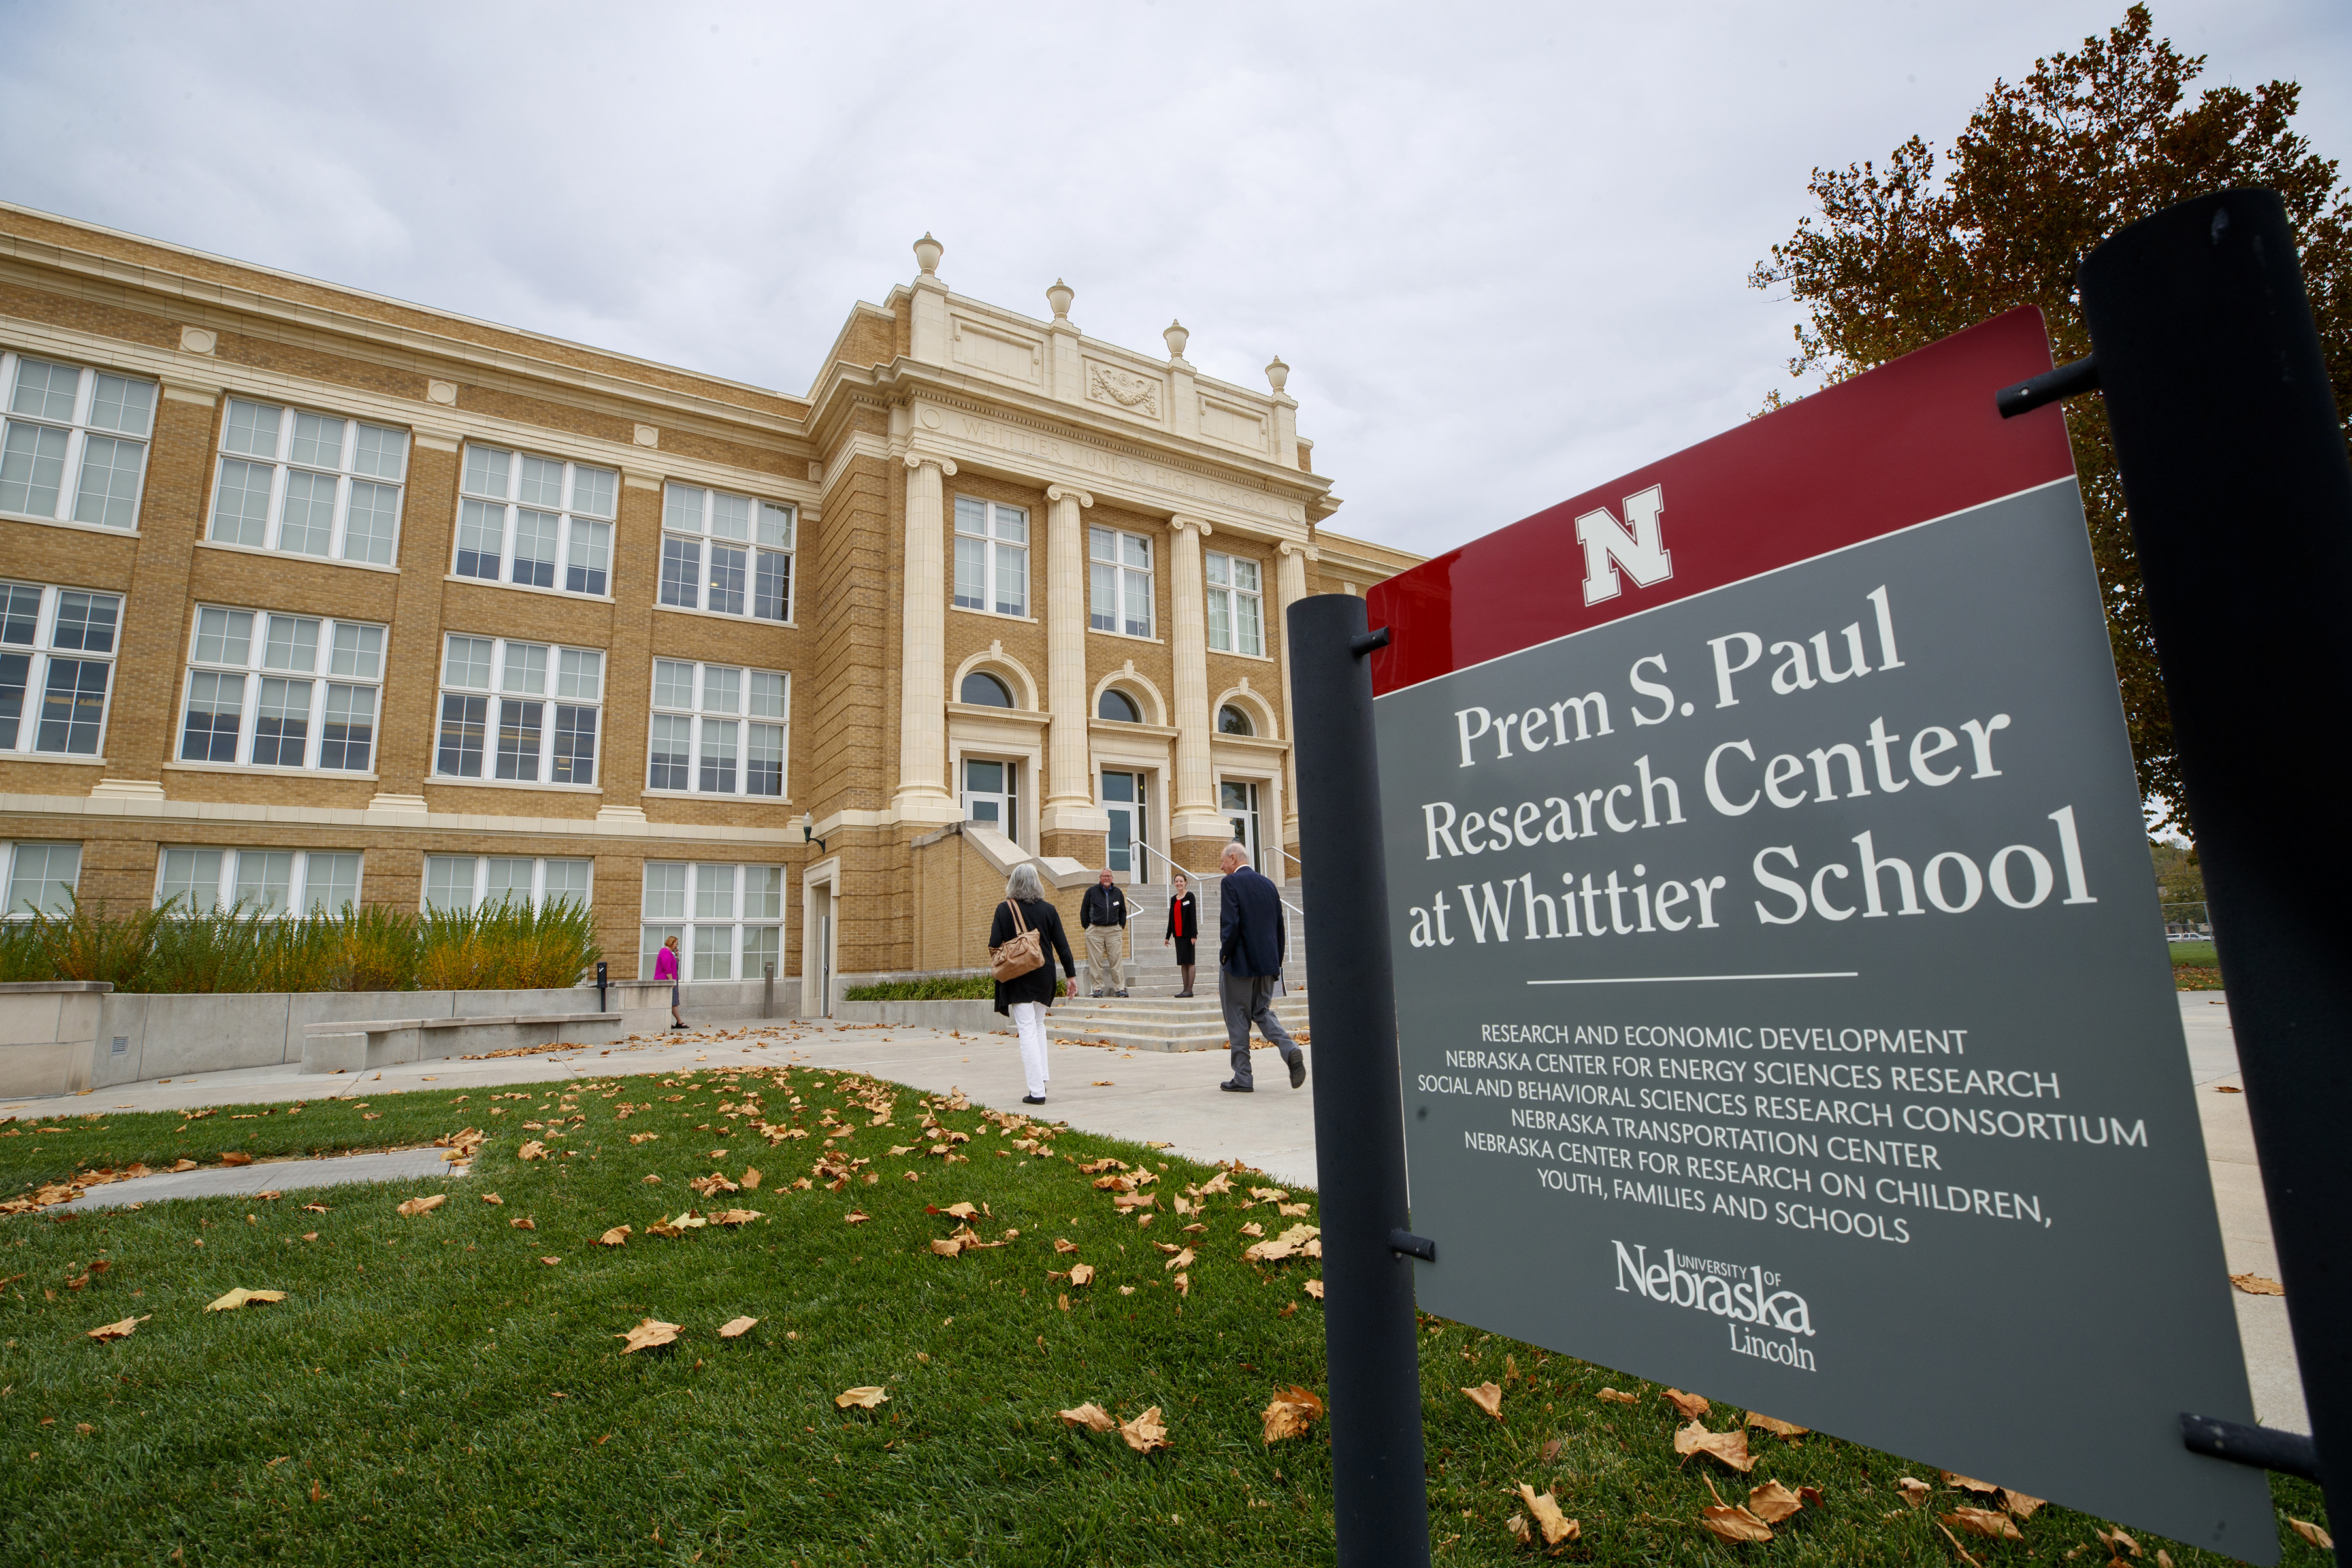 The university will celebrate the legacy of Prem S. Paul during an 11 a.m. Nov. 22 event at the newly renamed Prem S. Paul Research Center at Whittier School.